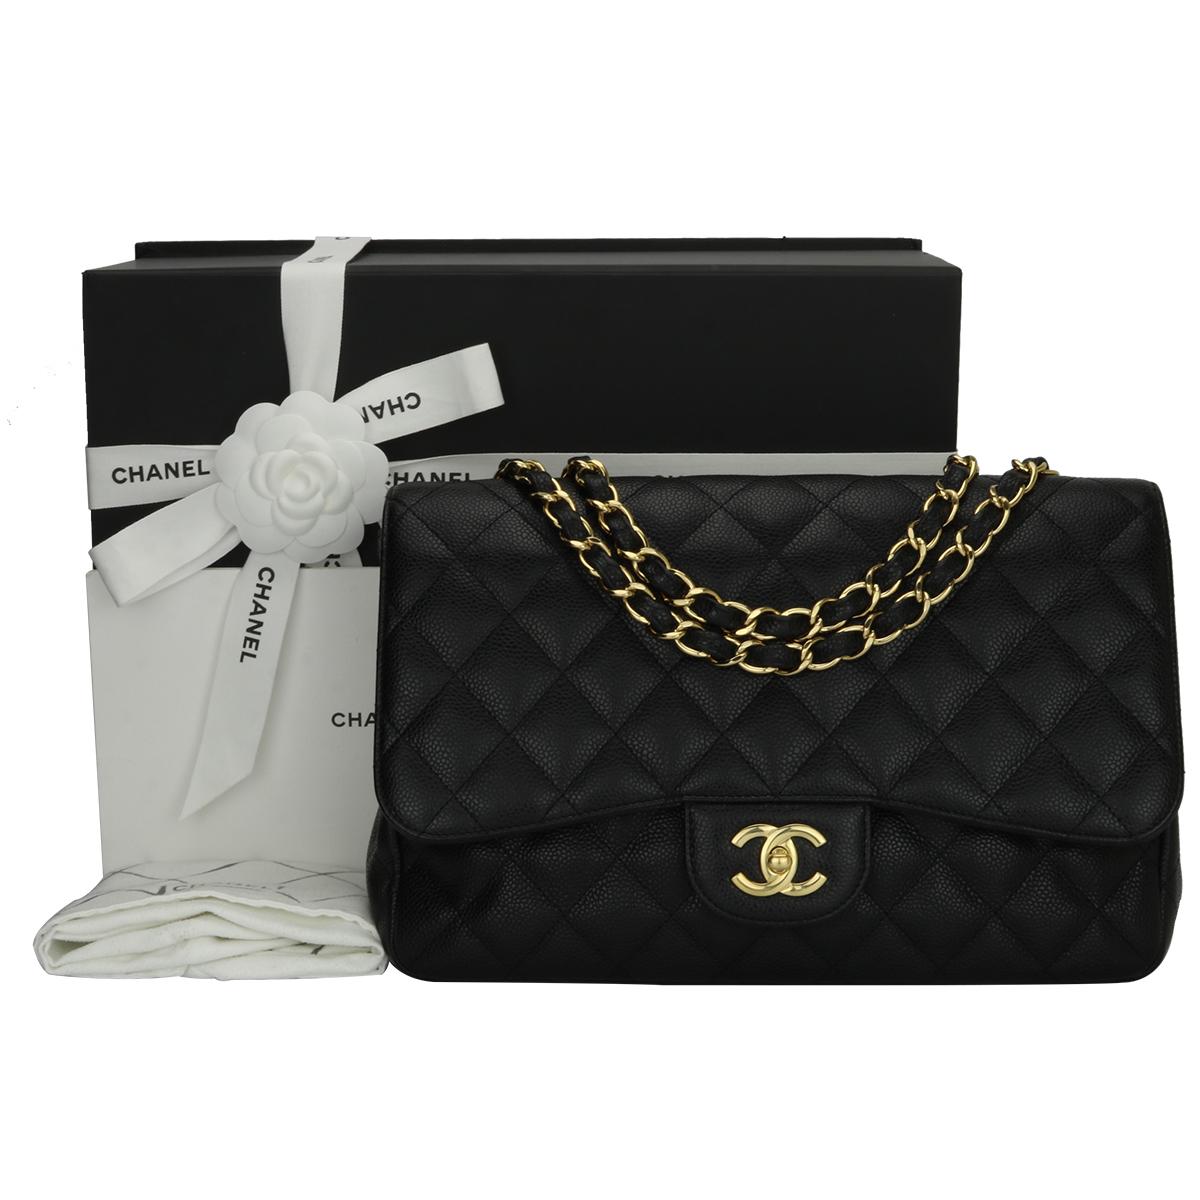 Authentic CHANEL Classic Single Flap Jumbo Black Caviar with Gold Hardware 2009.

This stunning bag is in excellent condition, the bag still holds its original shape and the hardware is still very shiny.

Exterior Condition: Excellent condition,